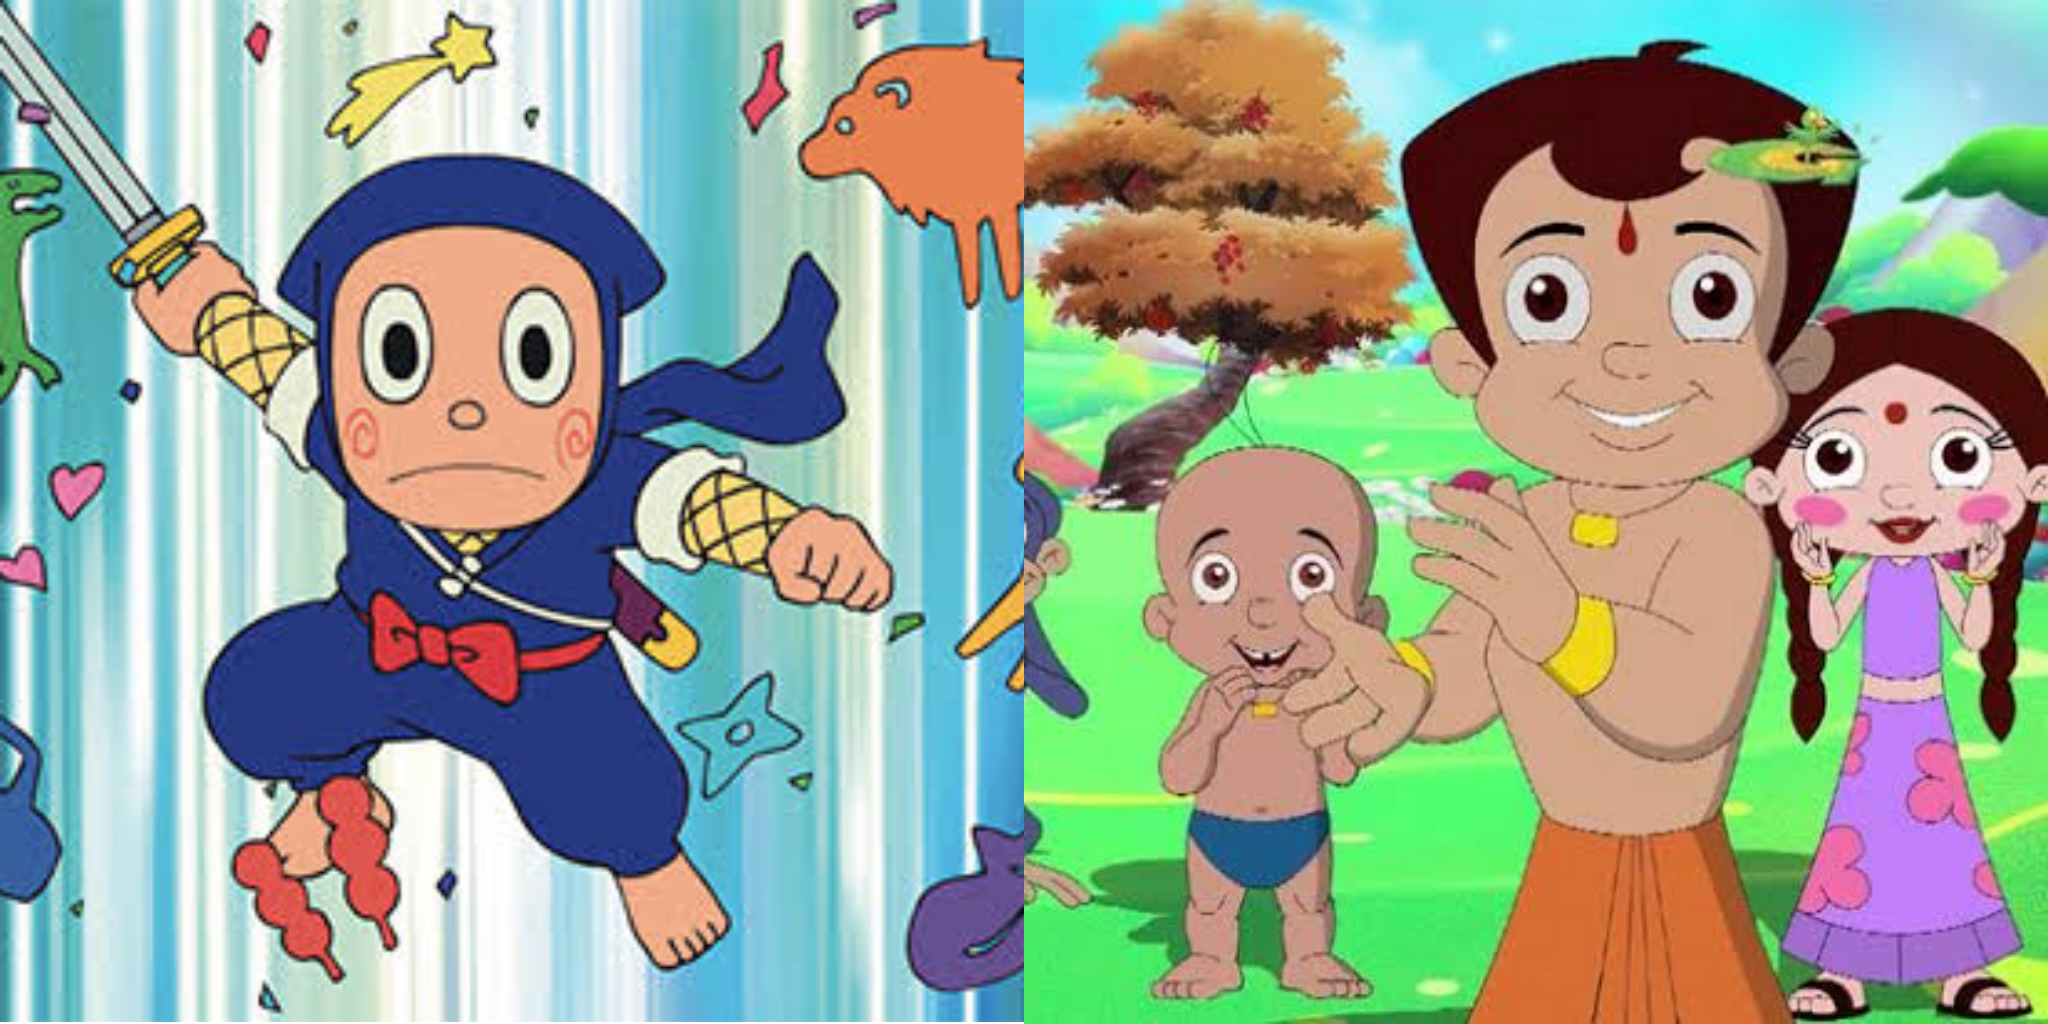 Animators to recreate a popular Japanese show for India - Media India Group